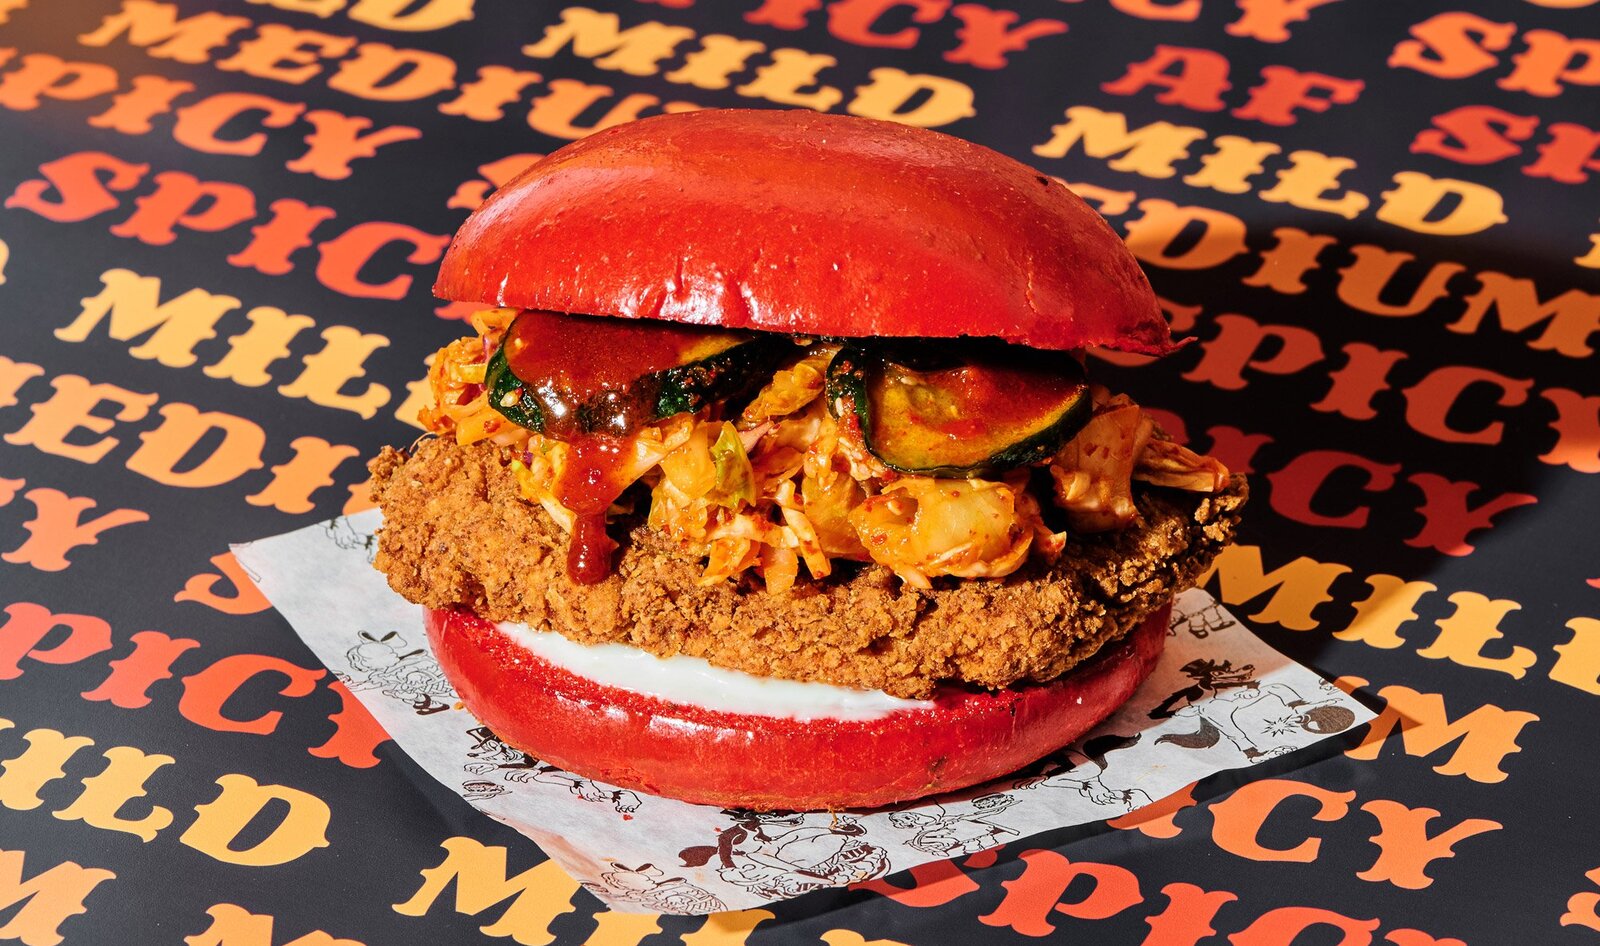 18 Vegan Fried Chicken Sandwiches That Are Better Than Chick-fil-A and Popeyes